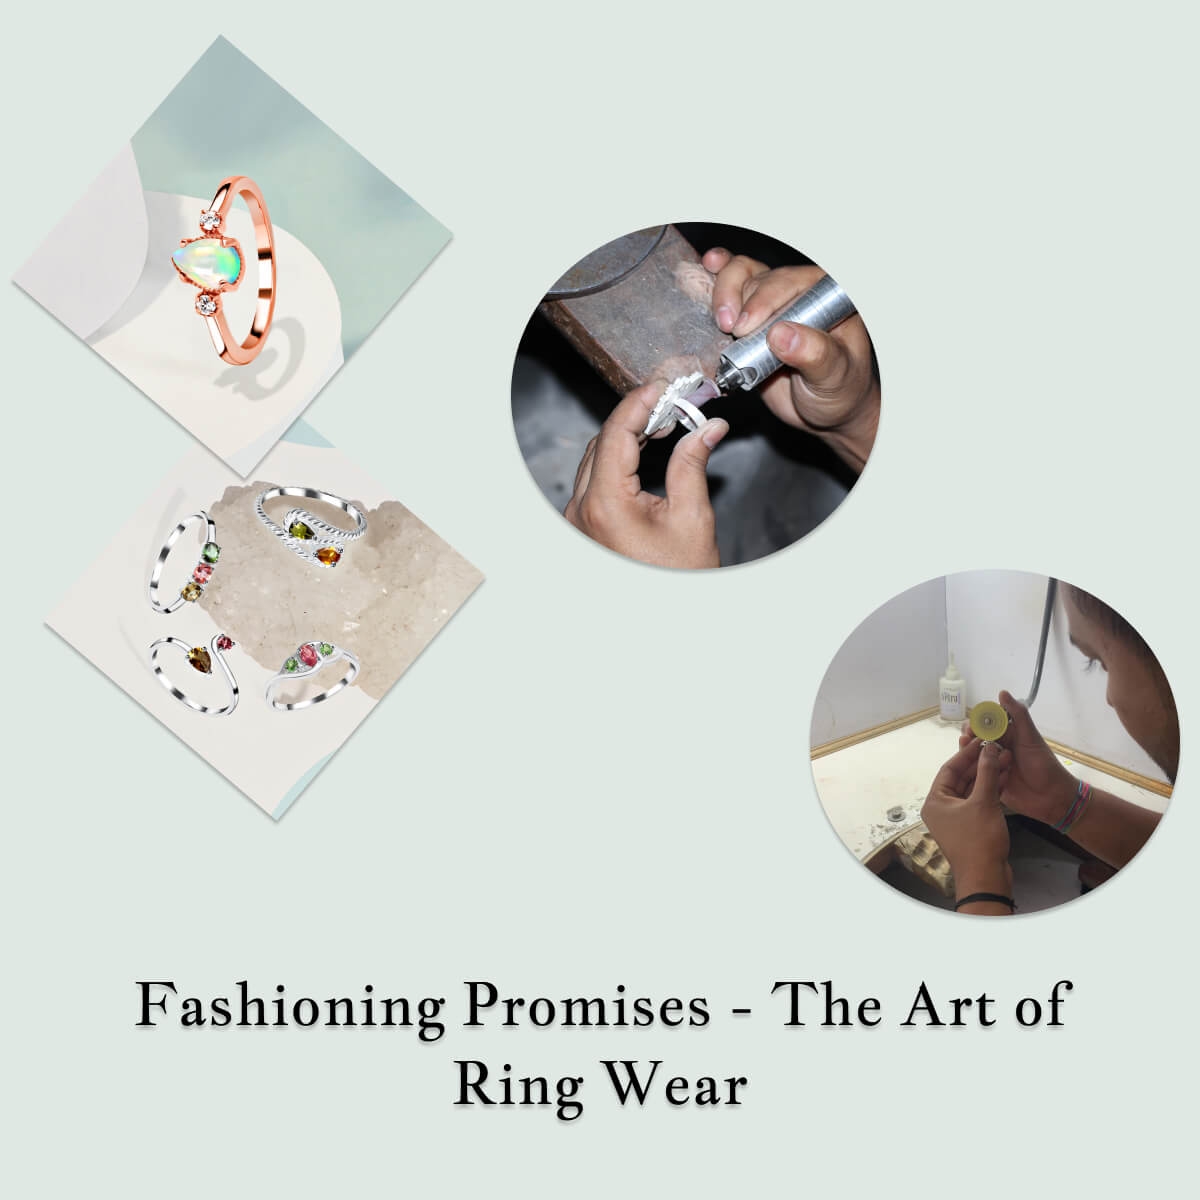 How Do You Wear A Promise Ring?